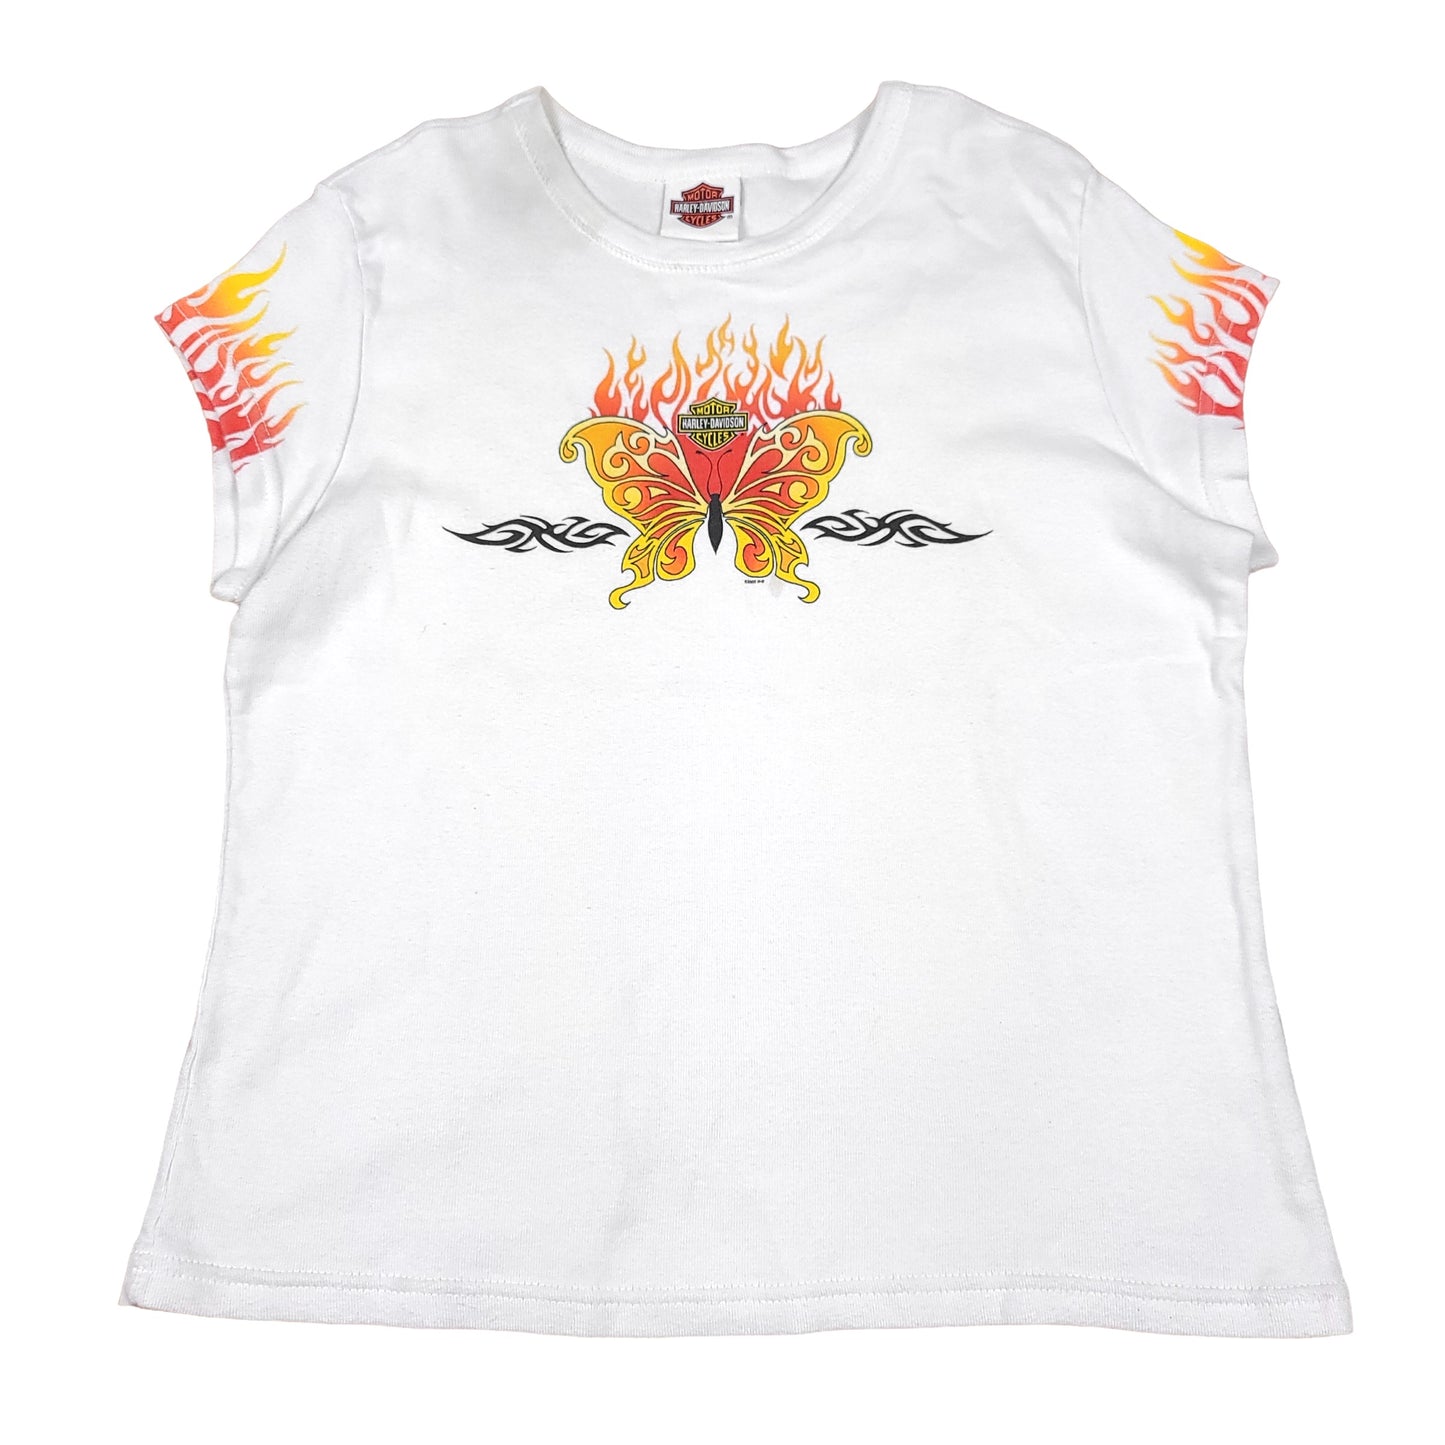 Harley Davidson White Flaming Butterfly Tee